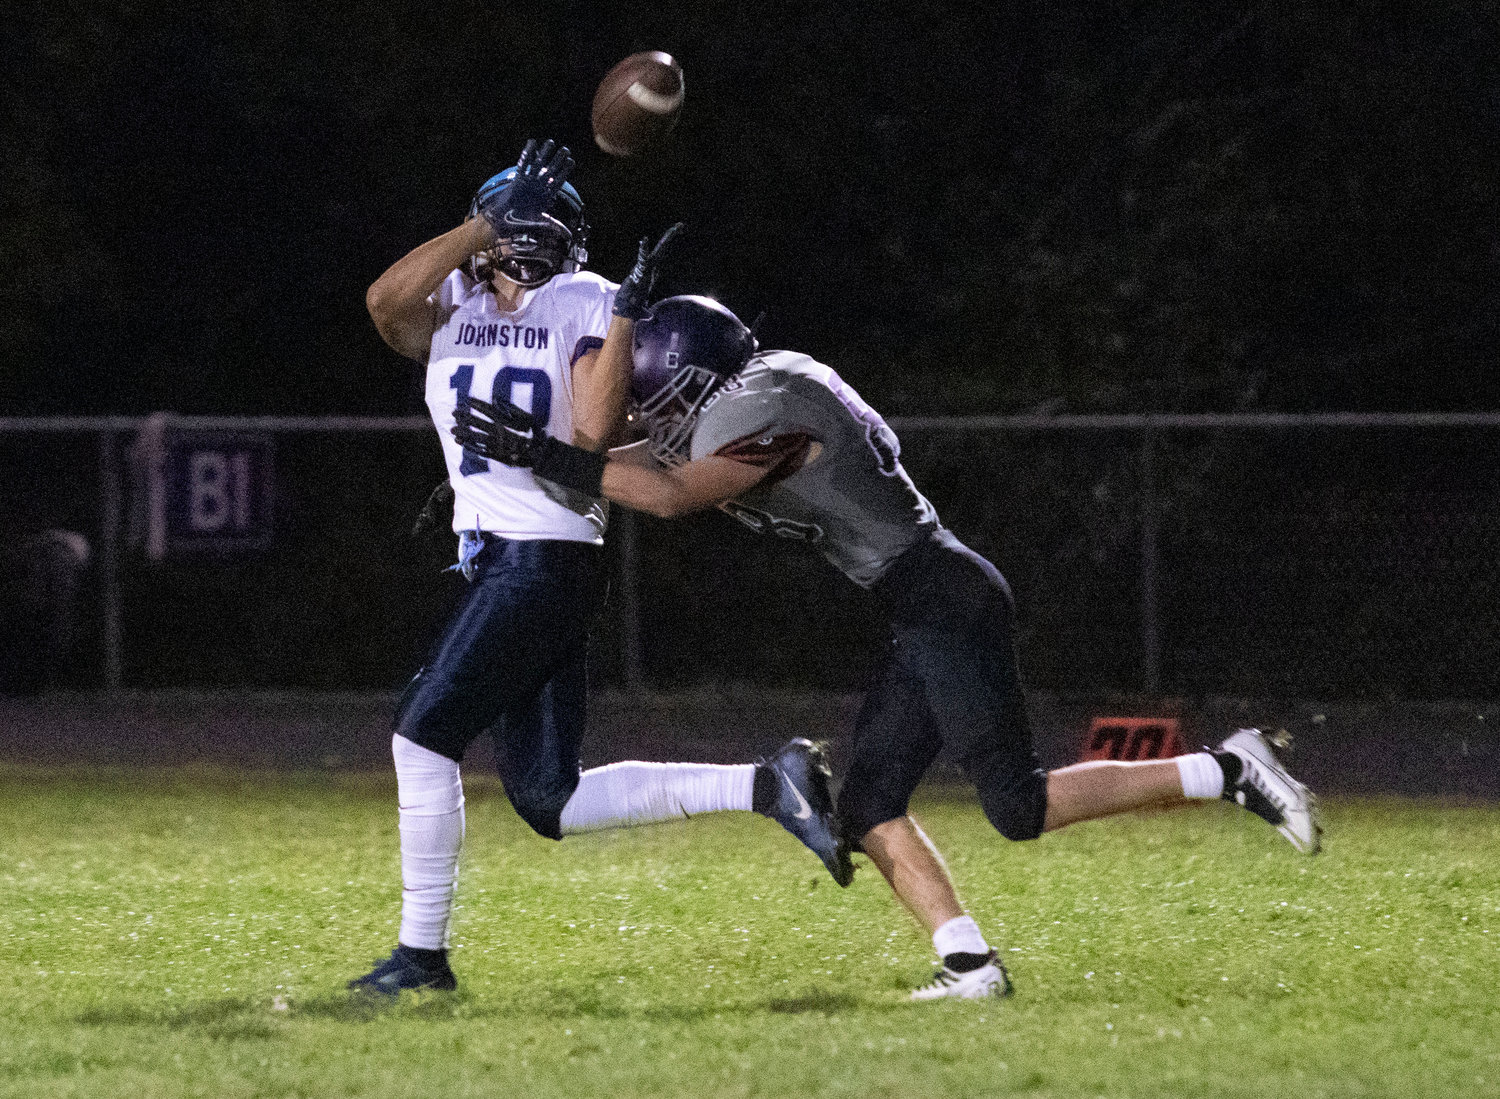 Jahaziel Rodriguez catches a bomb from Johnston quarterback Neari Vasquez with Huskies cornerback Evan Rodrigues on his tail. Rodrigues promptly tackled him at the 15 yard line.